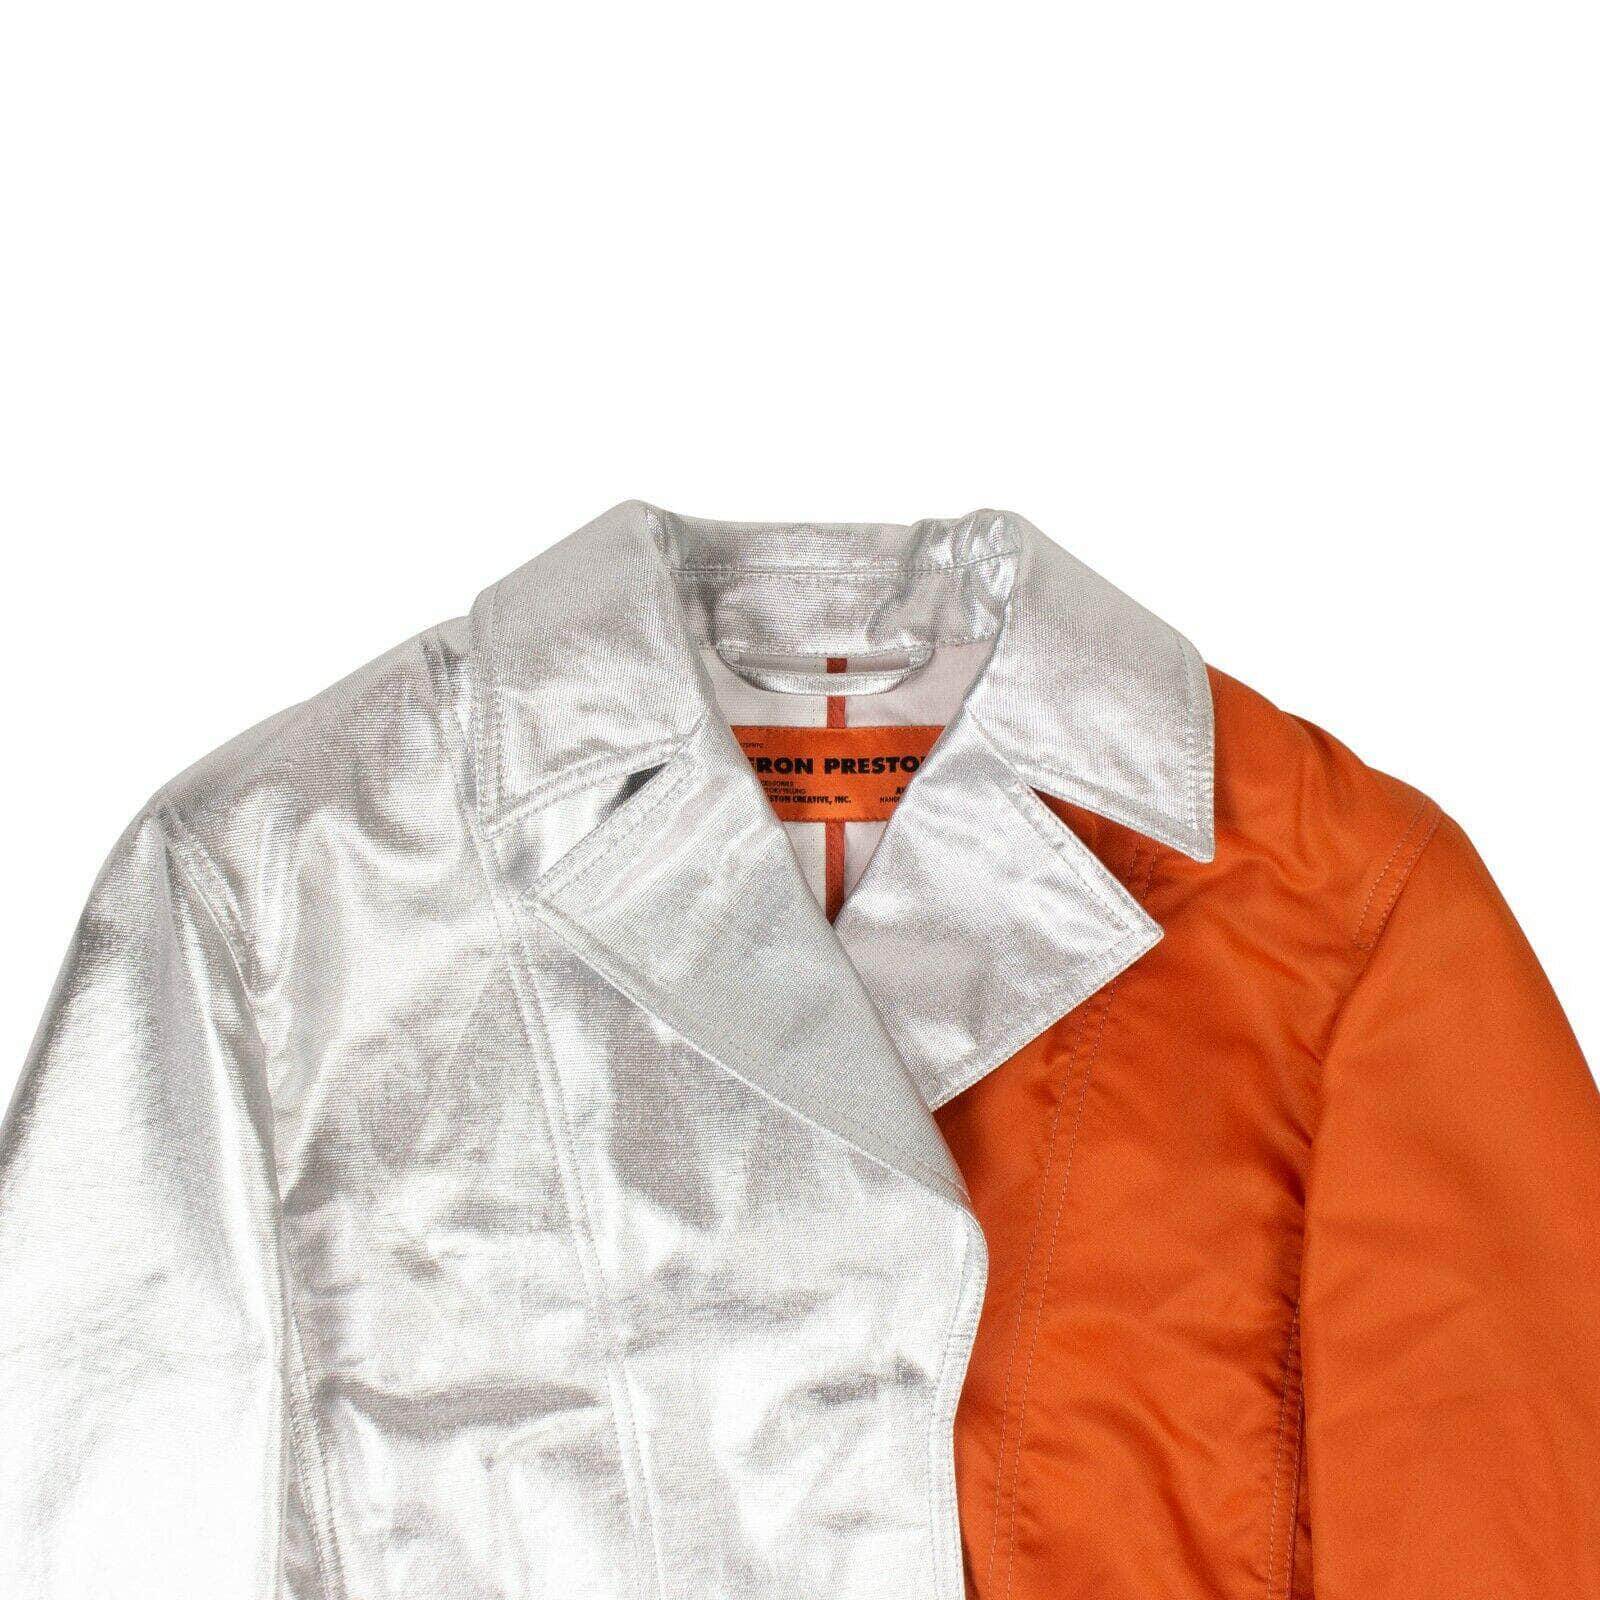 Heron Preston 500-750, channelenable-all, chicmi, couponcollection, gender-womens, heron-preston, main-clothing, size-s, womens-jackets-blazers S Silver And Orange Blazer 74NGG-HP-5/S 74NGG-HP-5/S